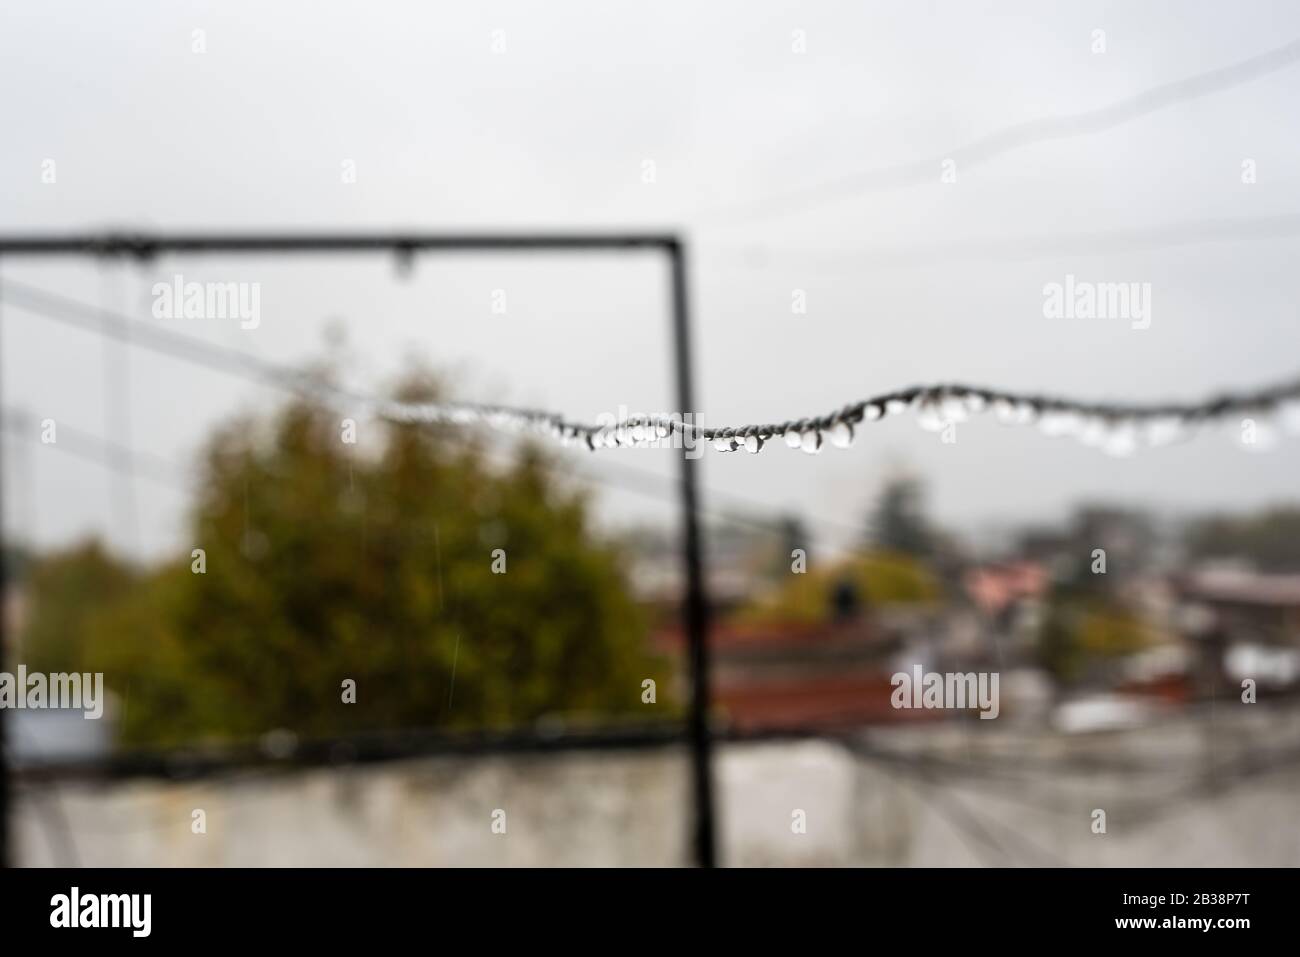 Clothesline wire full of small drops on a rainy day with a selective focus in the center very shallow depth of field Stock Photo